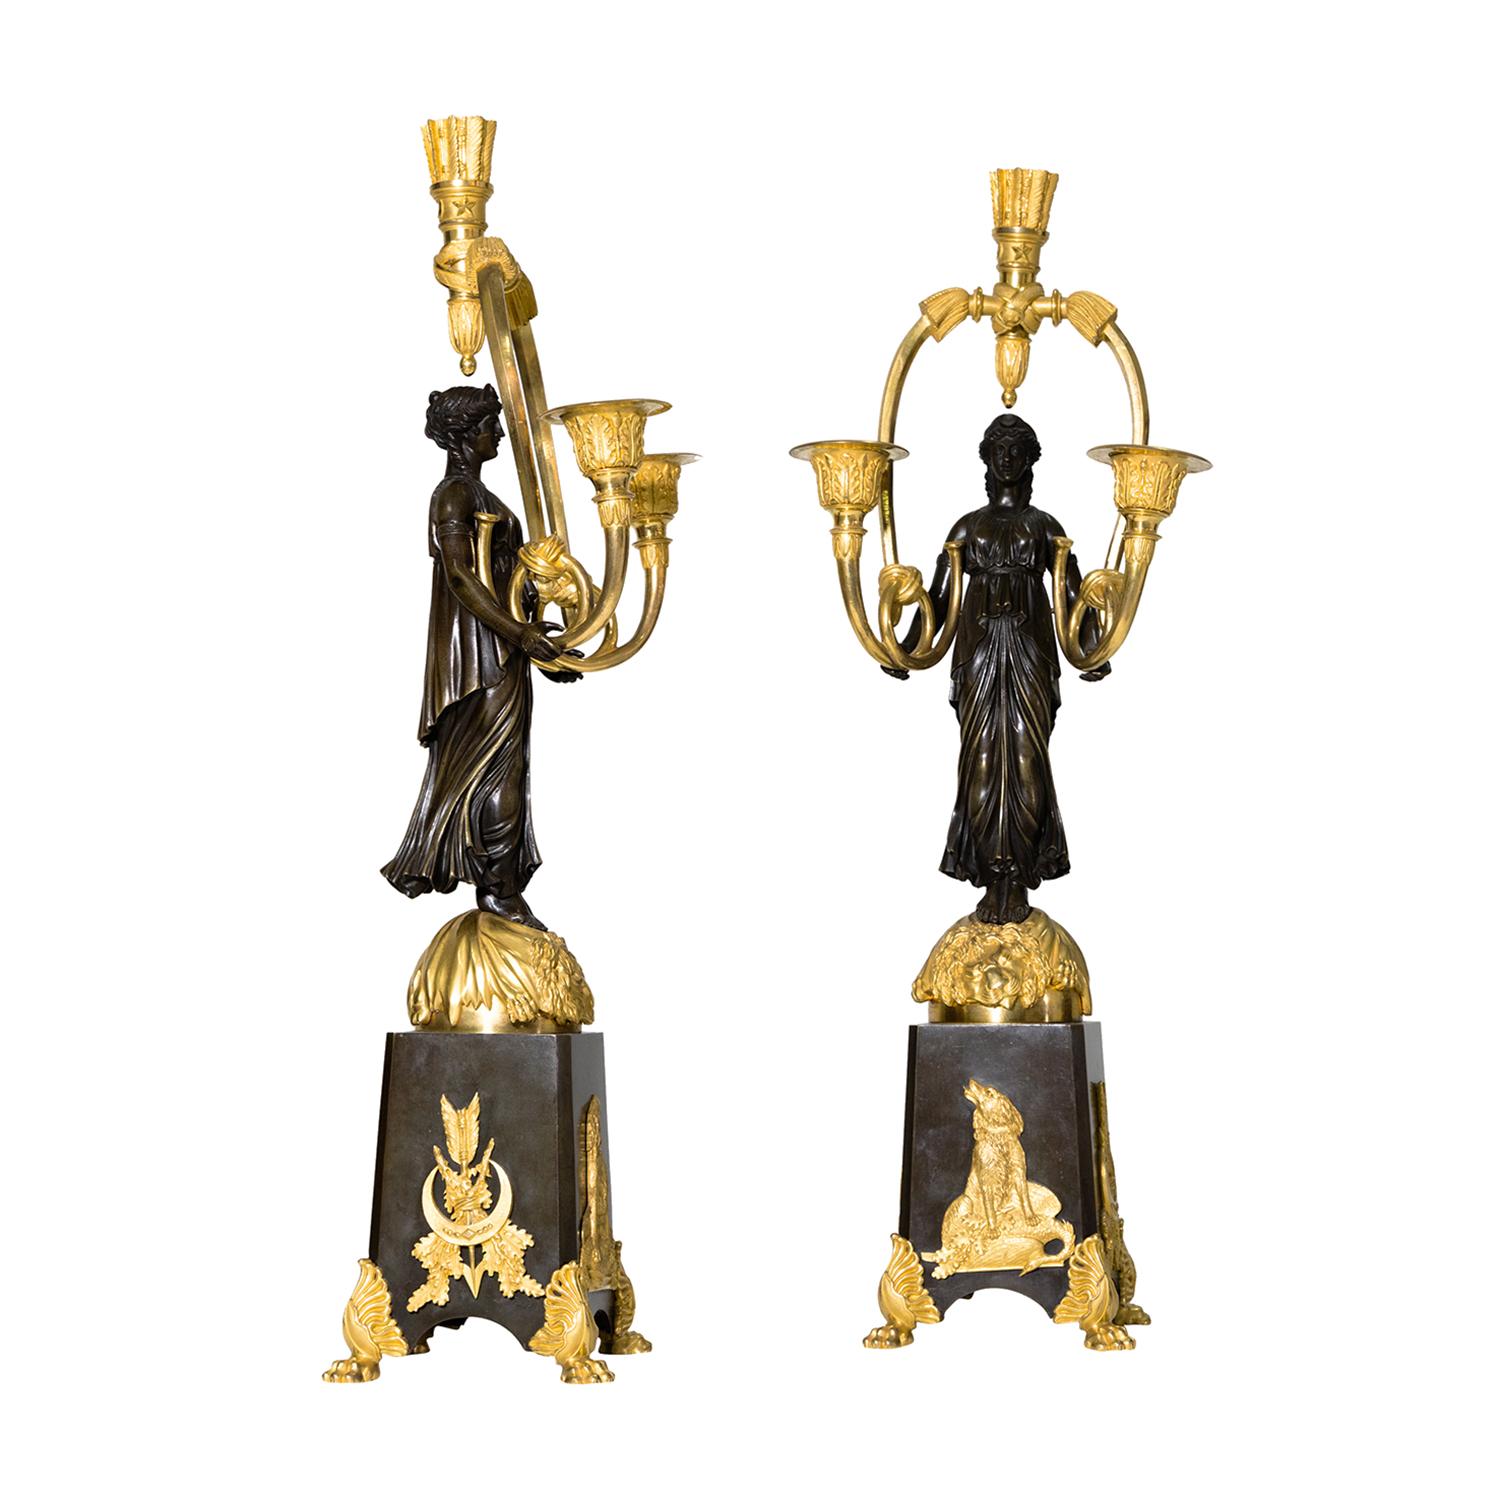 Polished 19th Century French Pair of Bronze Girandoles Attributed to Friedrich Bergenfeld For Sale